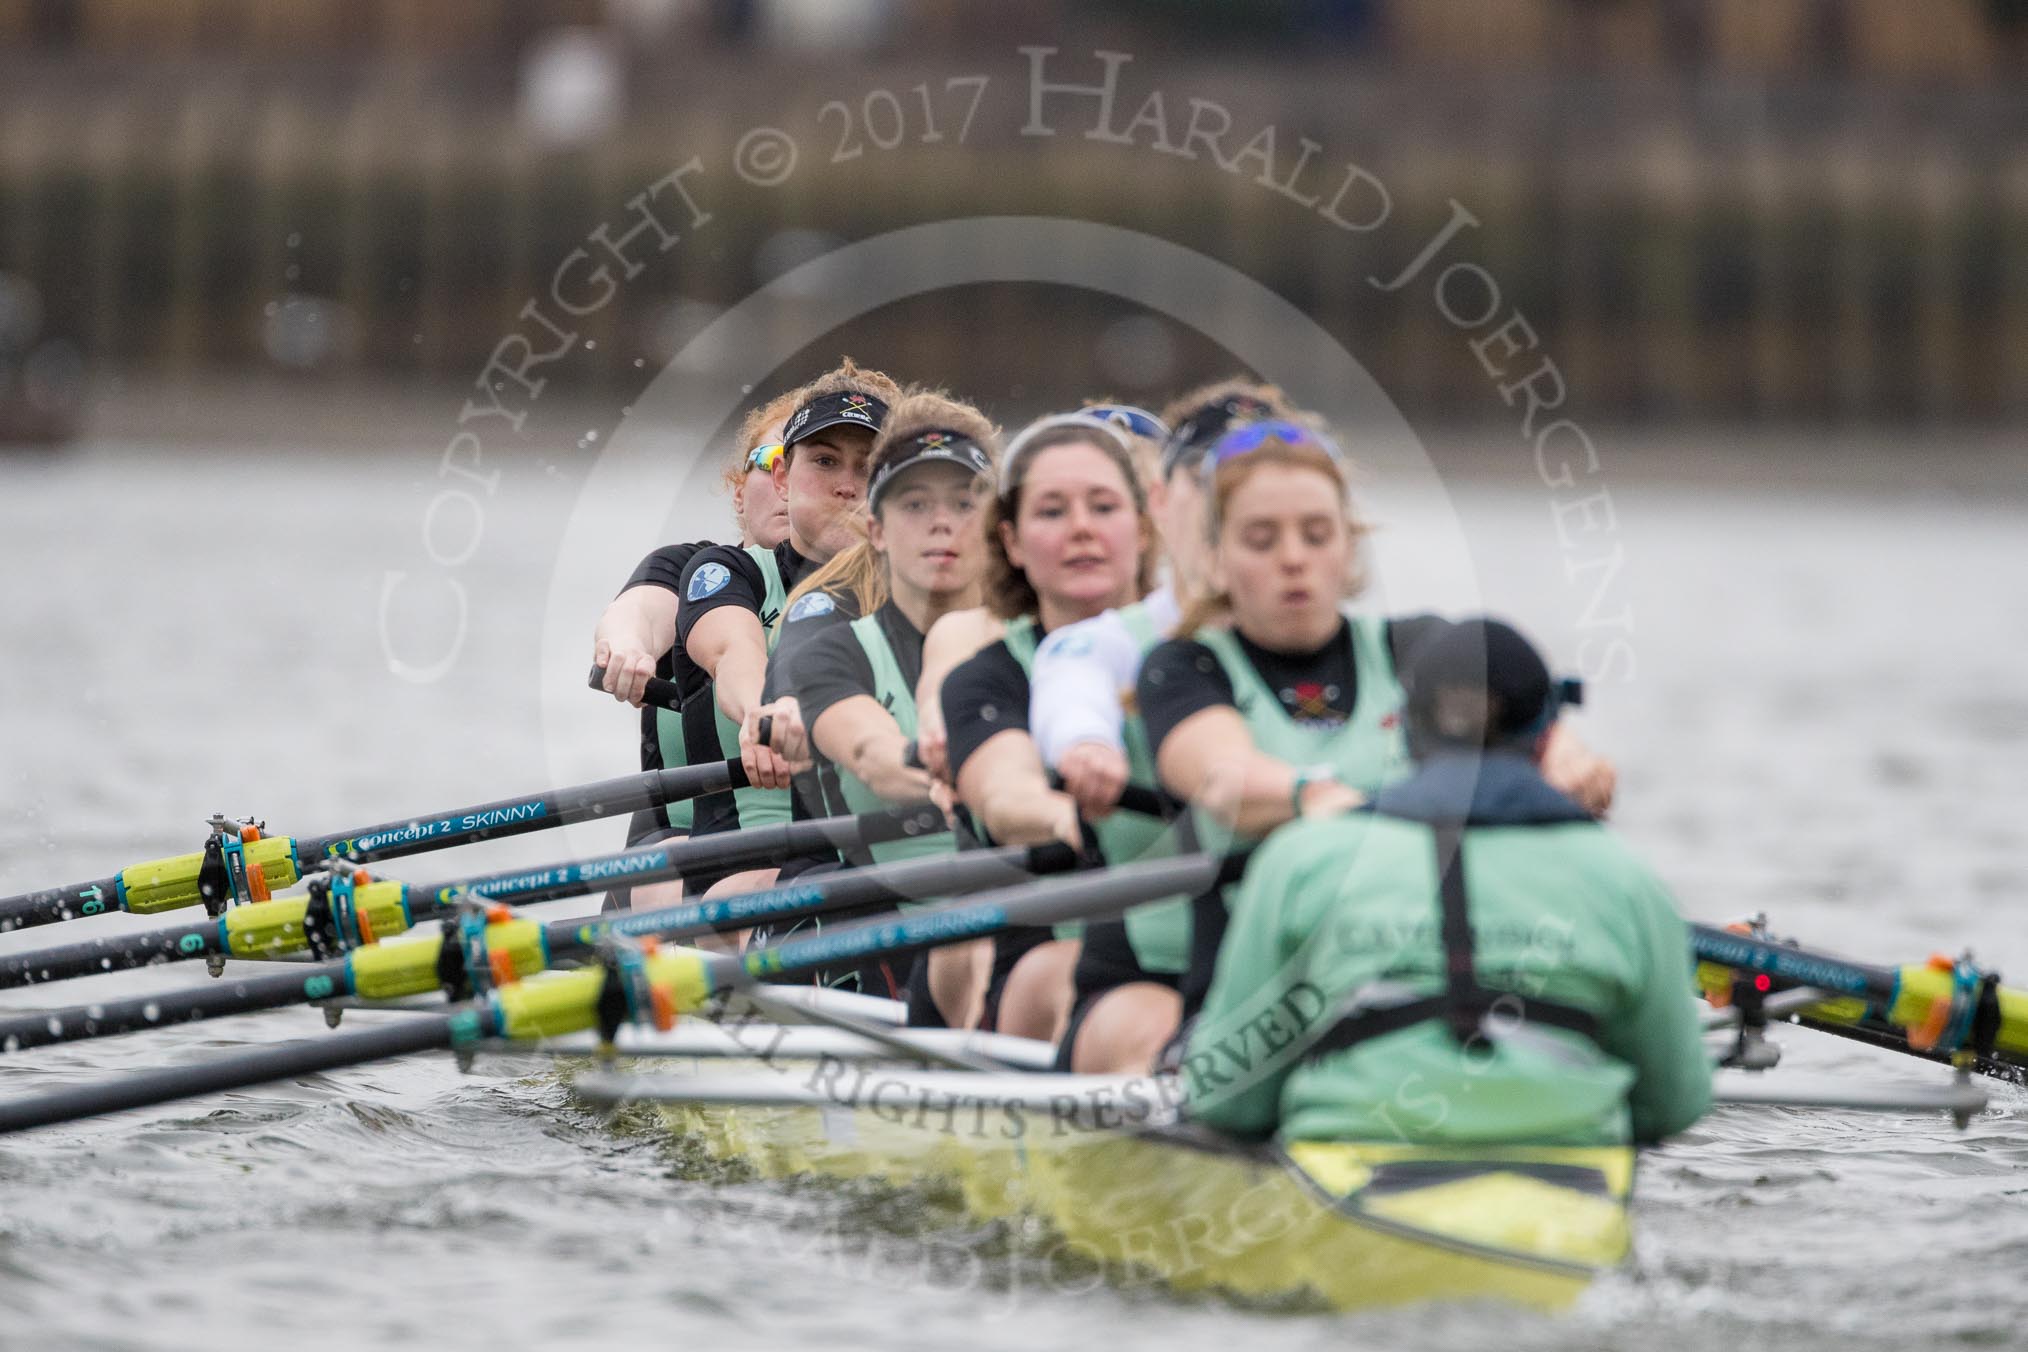 The Boat Race season 2017 - Women's Boat Race Fixture CUWBC vs Univerity of London: The CUWBC eight on the way to a flying start for the second piece of the fixture, bow - Claire Lambe, 2 - Kirsten Van Fosen, 3 - Ashton Brown, 4 - Imogen Grant, 5 - Holy Hill, 6 - Melissa Wilson, 7 - Myriam Goudet, stroke - Alice White, cox - Matthew Holland.
River Thames between Putney Bridge and Mortlake,
London SW15,

United Kingdom,
on 19 February 2017 at 16:19, image #108